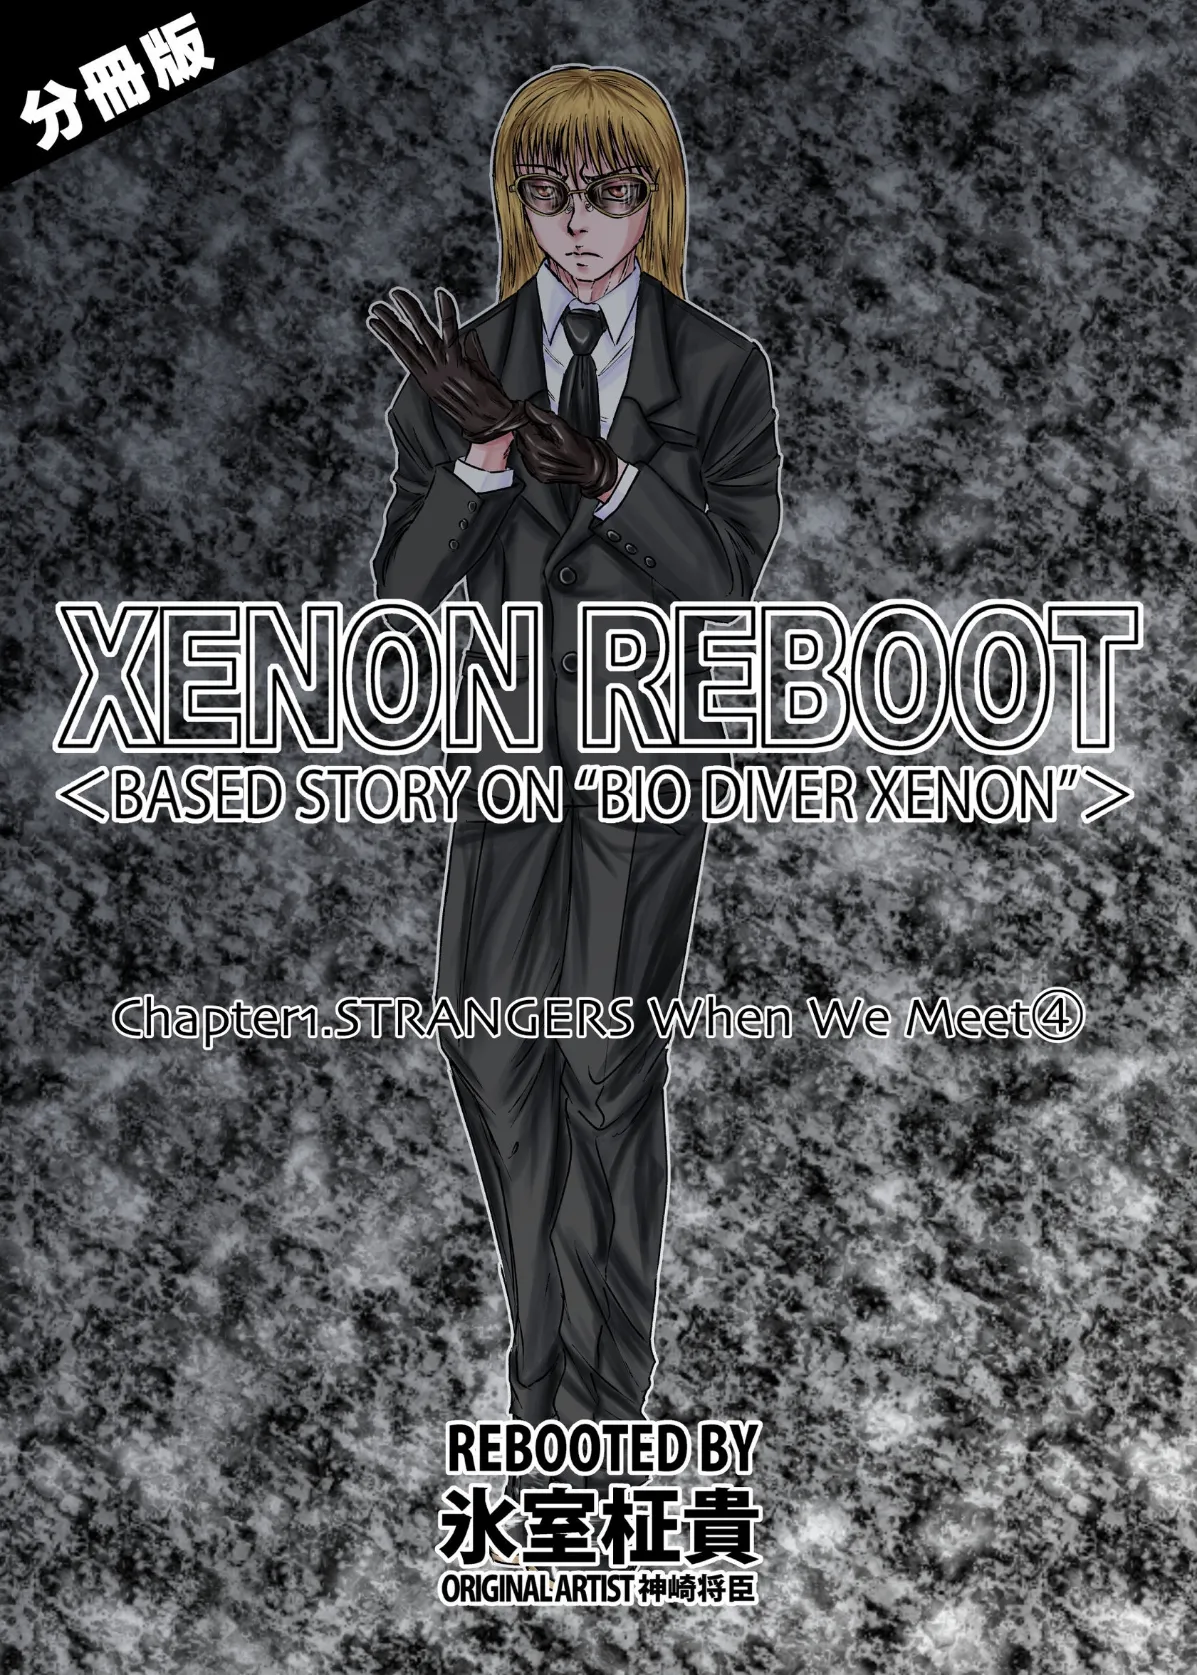 XENON REBOOT＜BASED STORY ON ’BIO DIVER XENON’＞【分冊版】 Chapter1 STRANGERS When We Meet（4） 1ページ